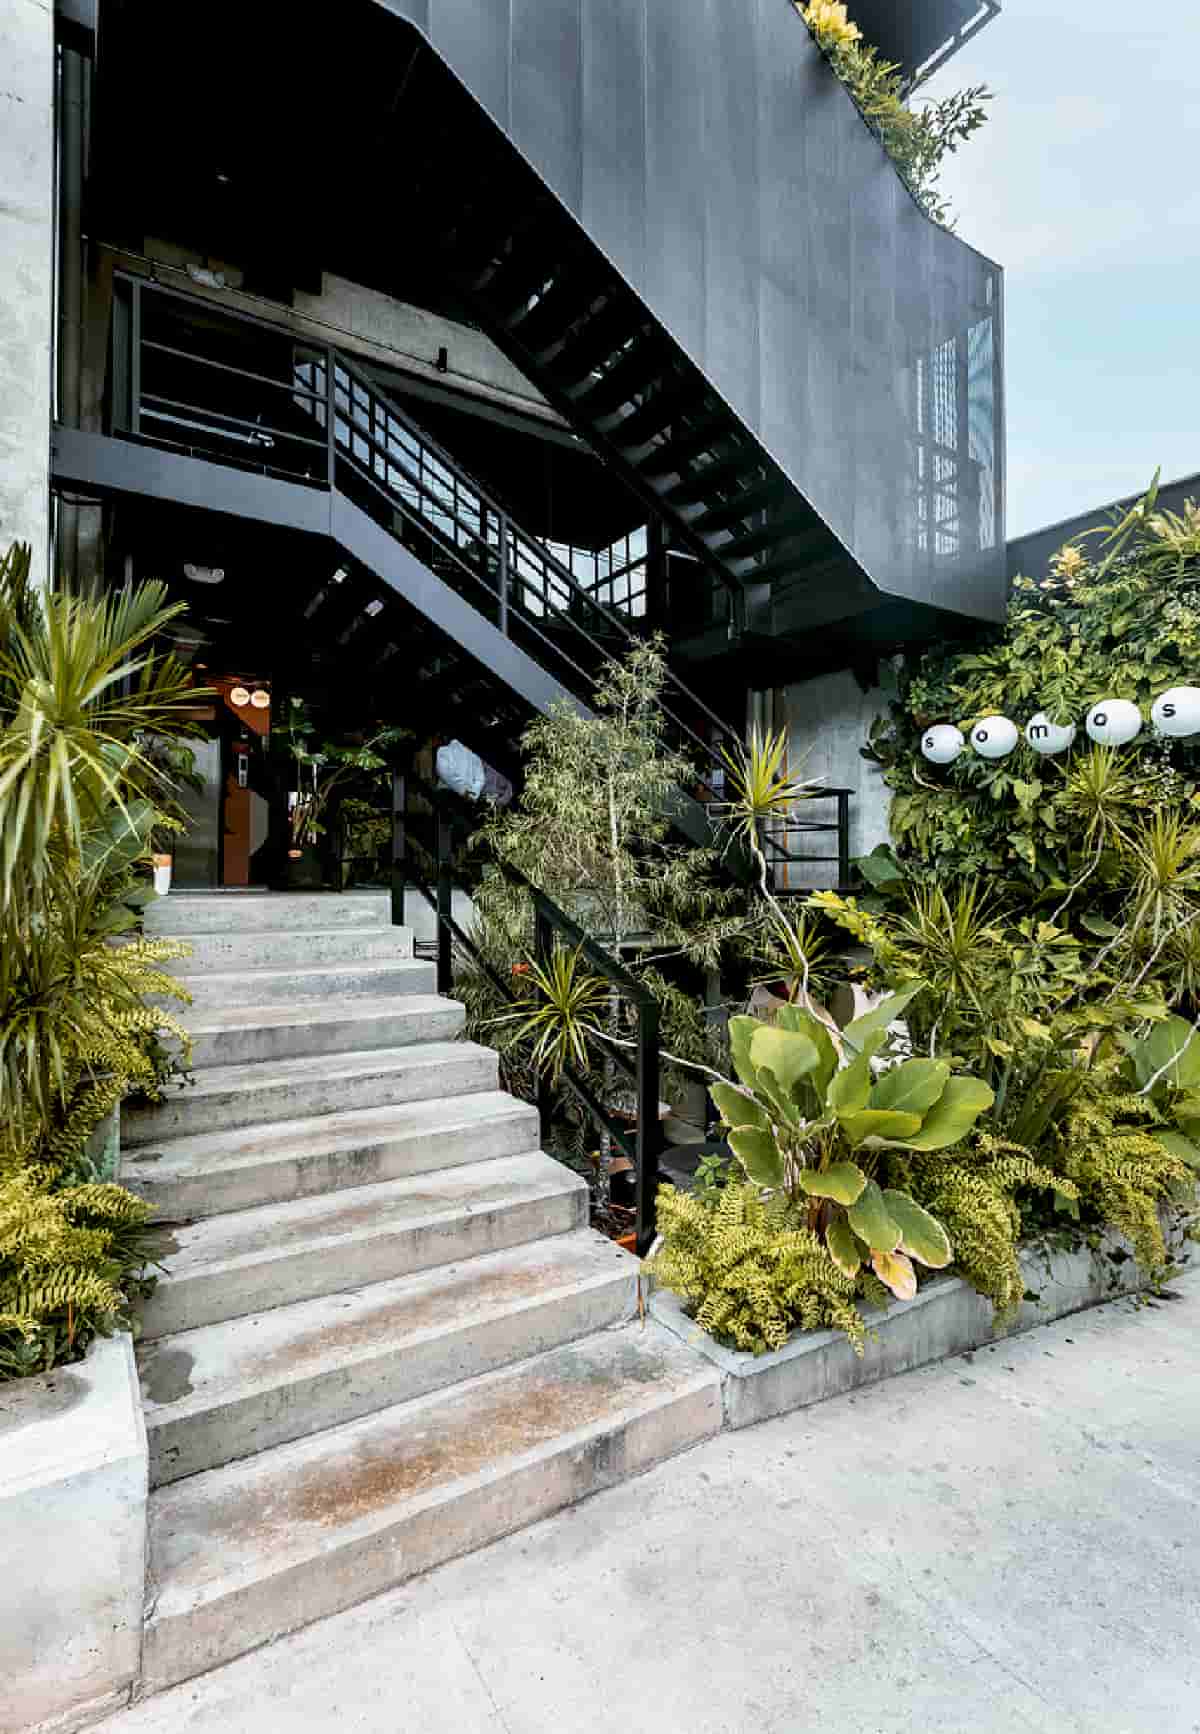 Urban Hotel Was Built Designed To Withstand The High Touristic Demand In El Poblado In Medellin